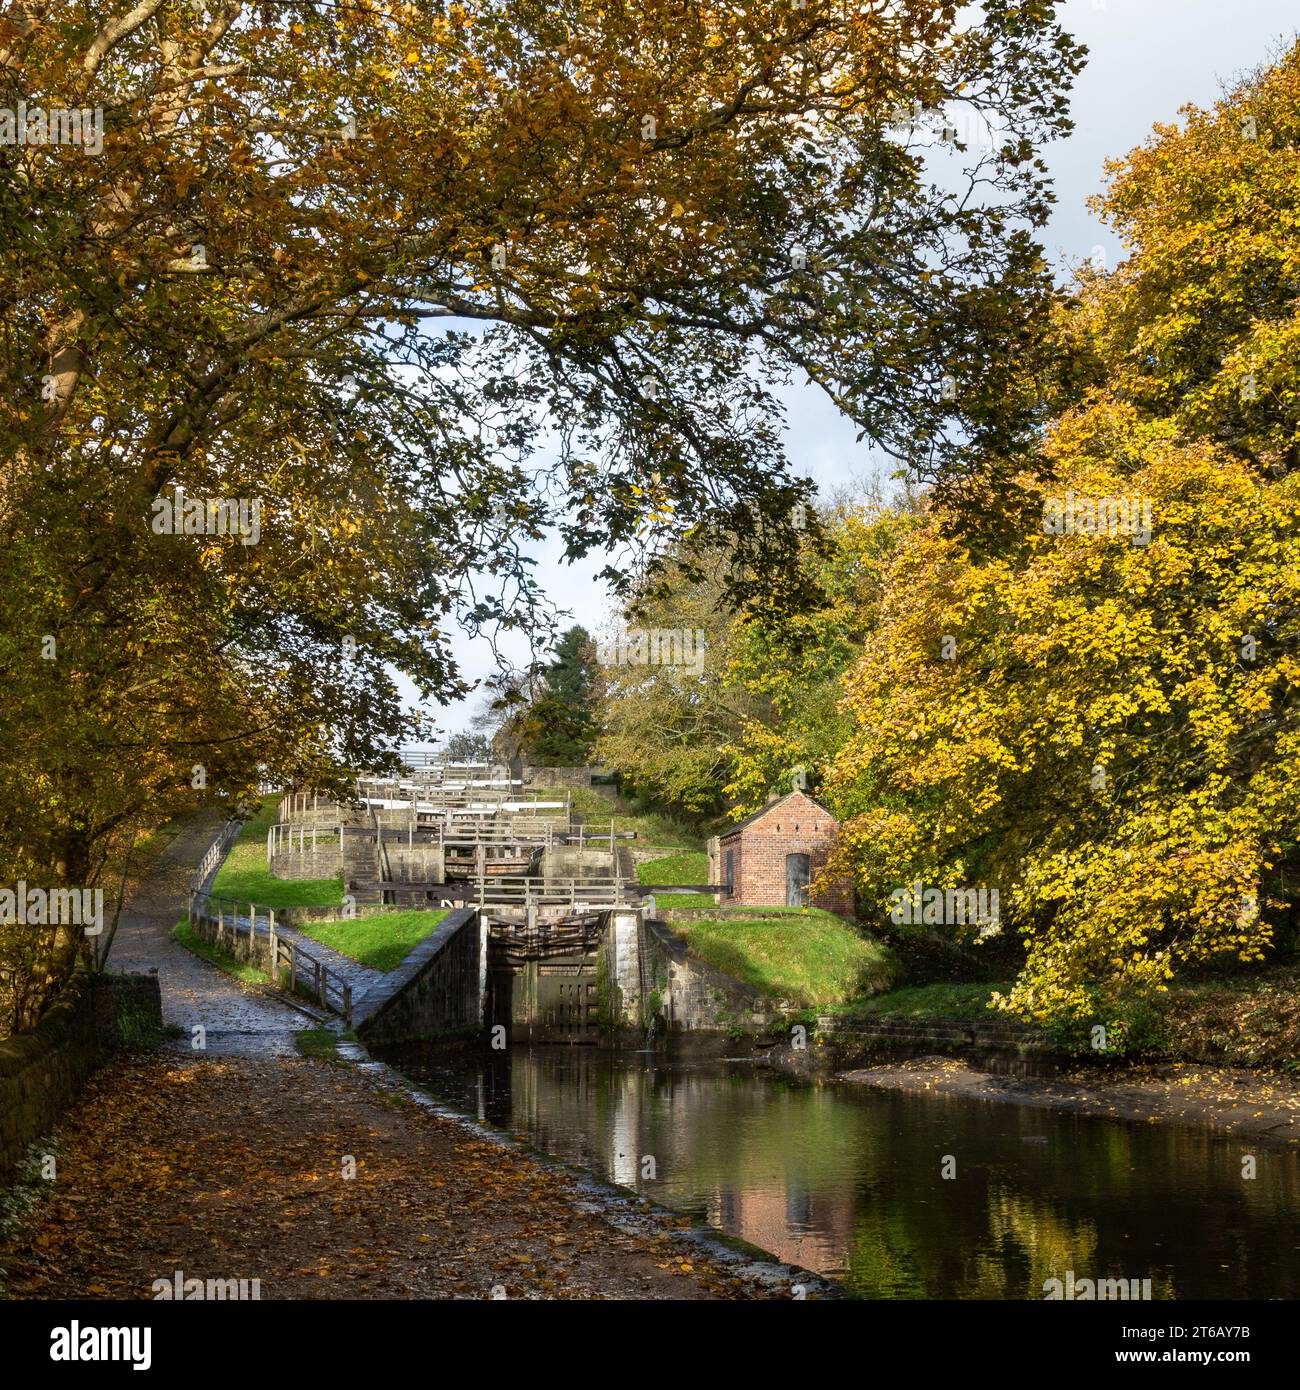 Five Rise Locks on the Leeds Liverpool Canal in Bingley, Yorkshire, in the Autumn. The locks are the steepest staircase locks in the country. Stock Photo